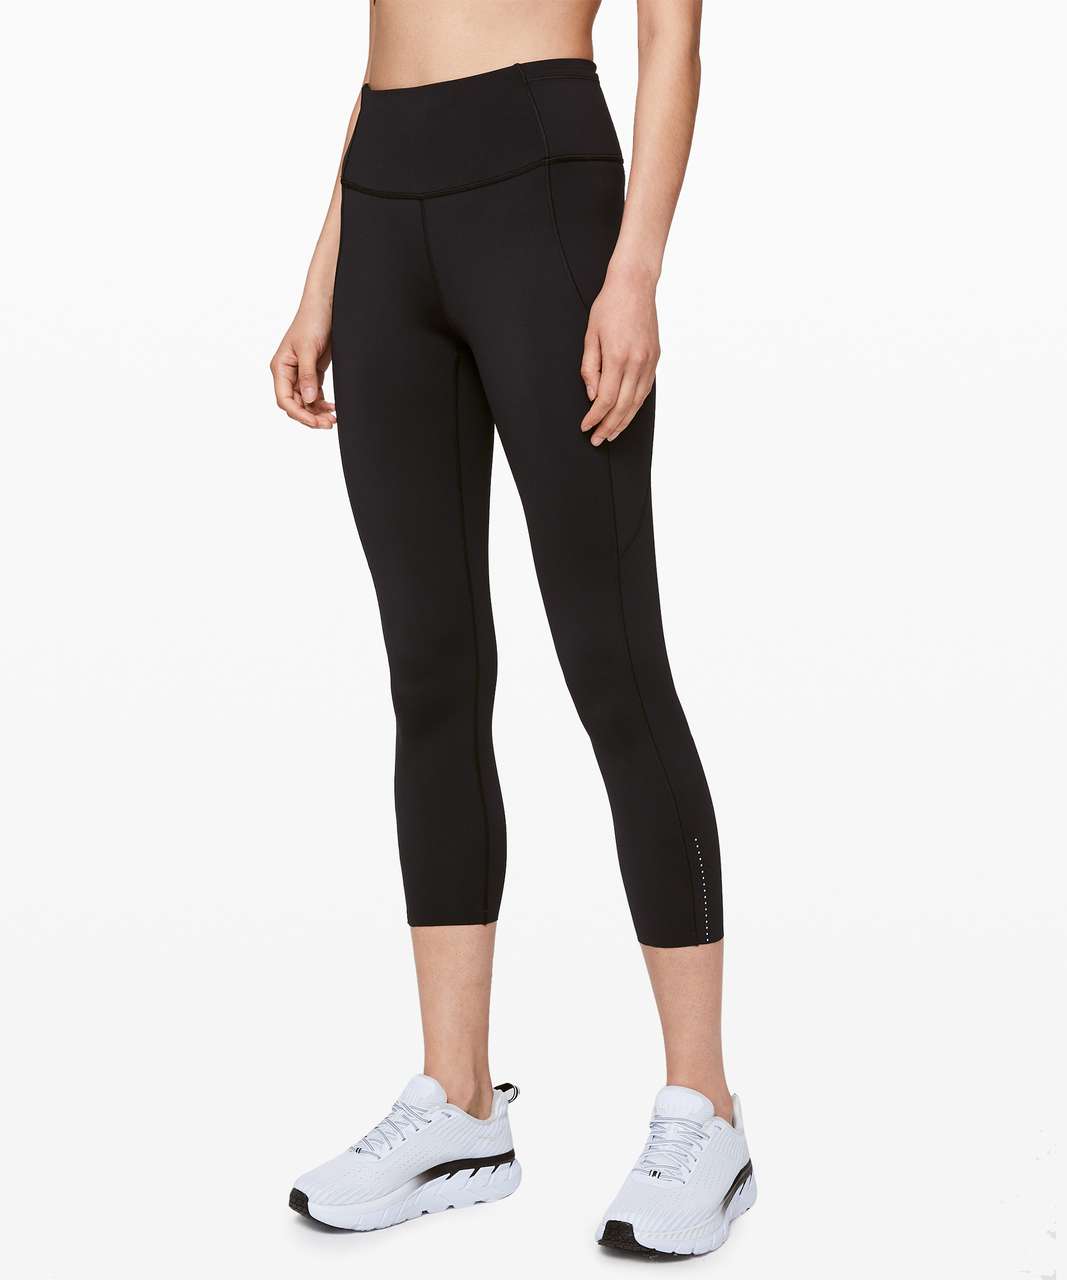 Lululemon Fast and Free High-Rise Crop 23" - Black